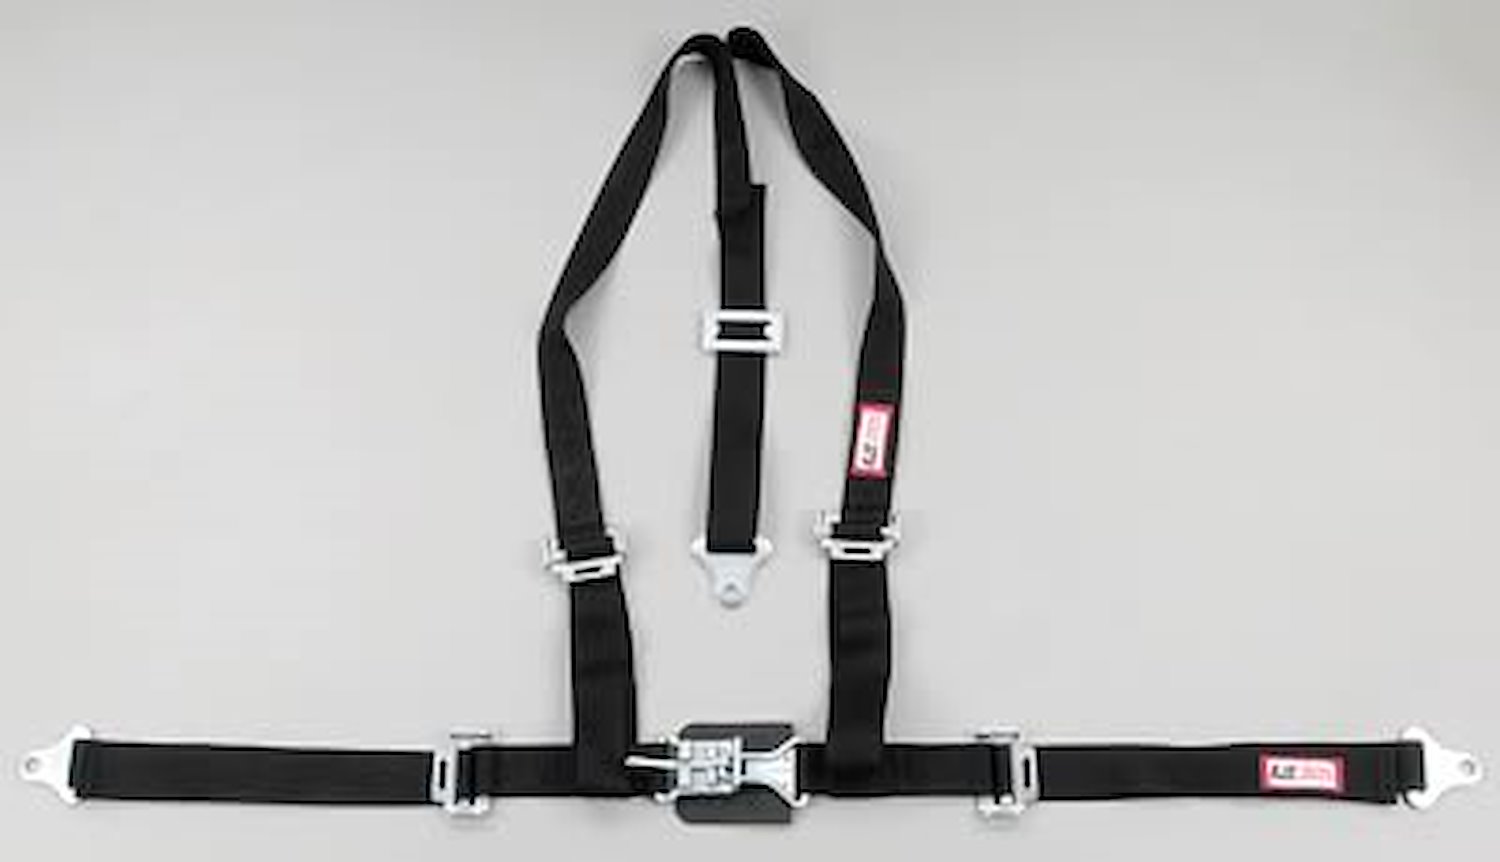 NON-SFI L&L HARNESS 3 PULL UP Lap BELT SEWN IN 2 S.H. Y FLOOR Mount ALL WRAP ENDS BLACK